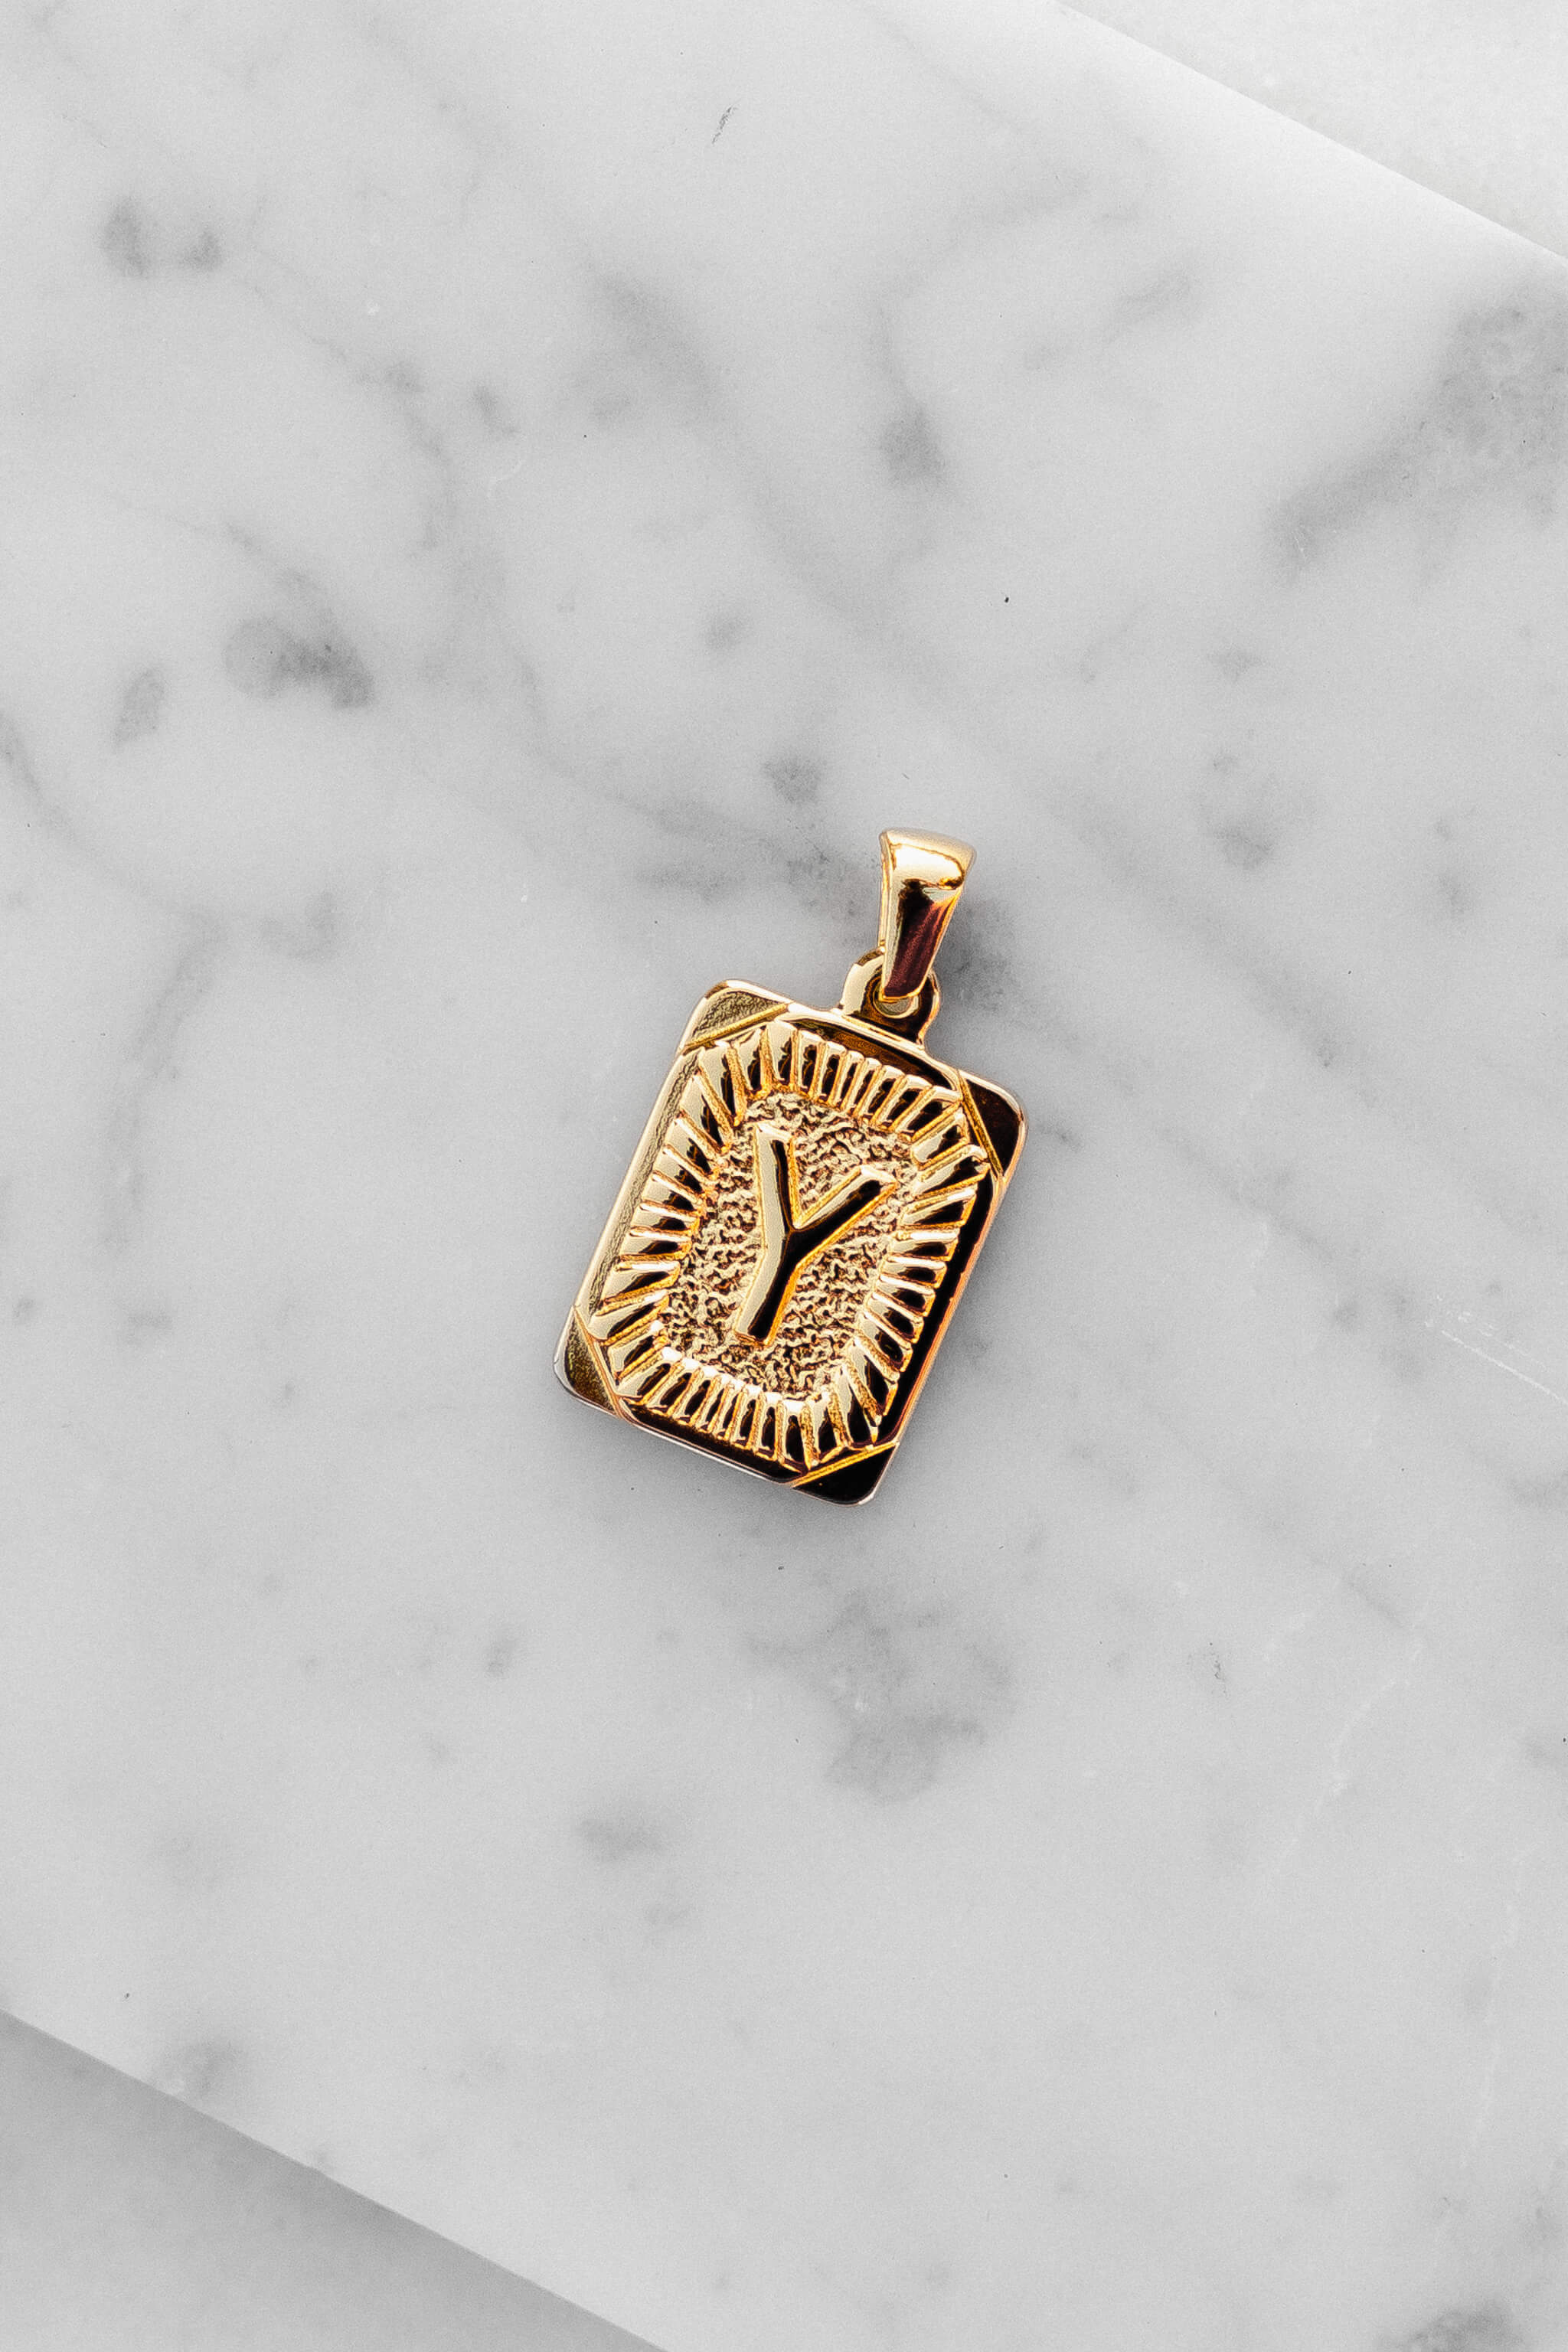 Gold Monogram Letter "Y" Charm laying on a marble